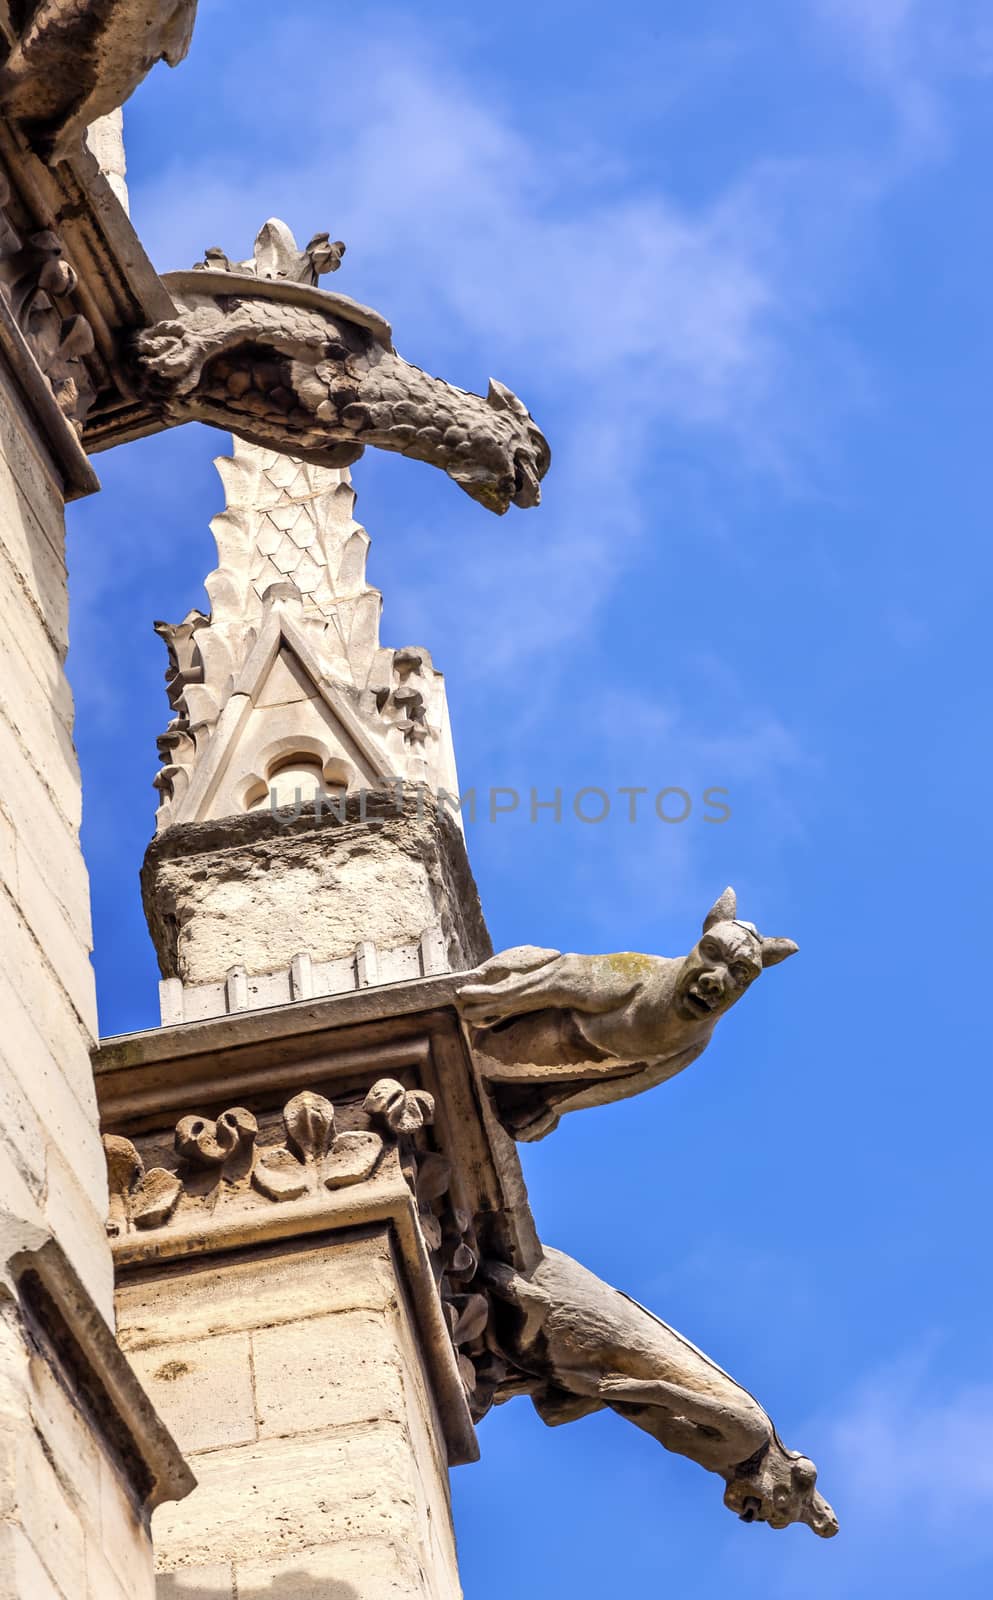 Cathedral Spire Statues Gargoyles Saint Chapelle Paris France.  Saint King Louis 9th created Sainte Chappel in 1248 to house Christian relics, including Christ's Crown of Thorns. 